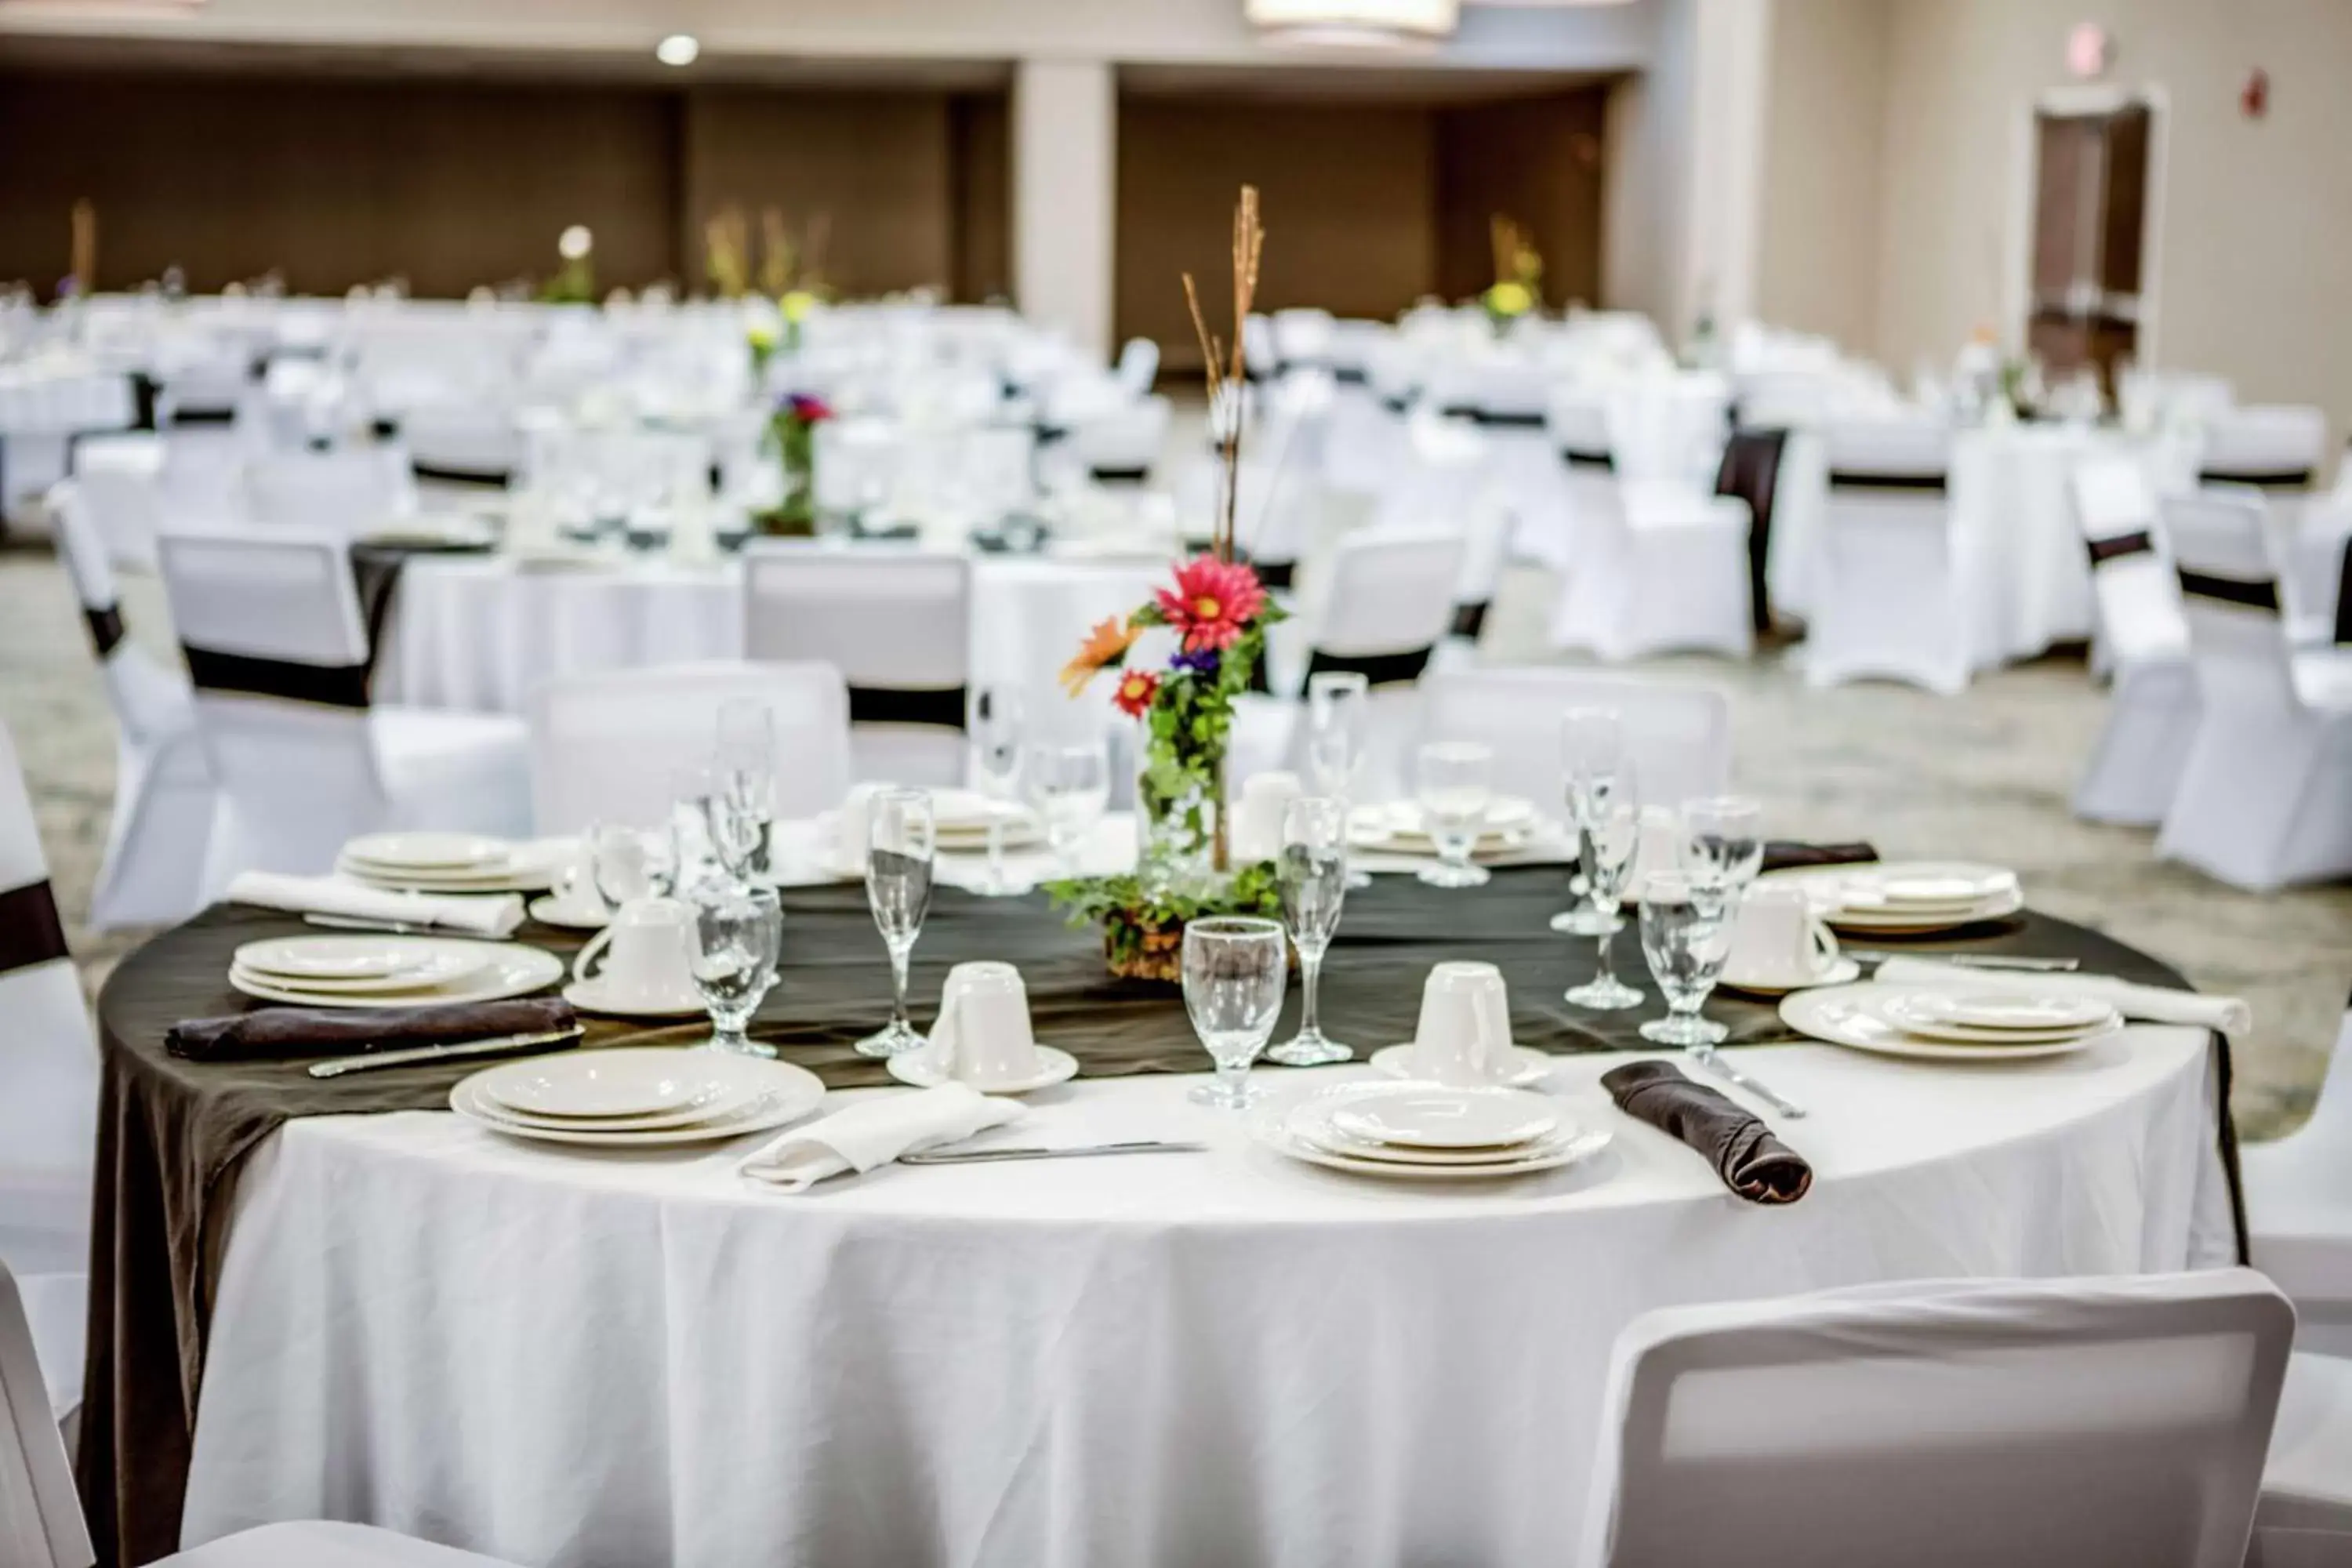 Meeting/conference room, Banquet Facilities in DoubleTree by Hilton Huntington, WV